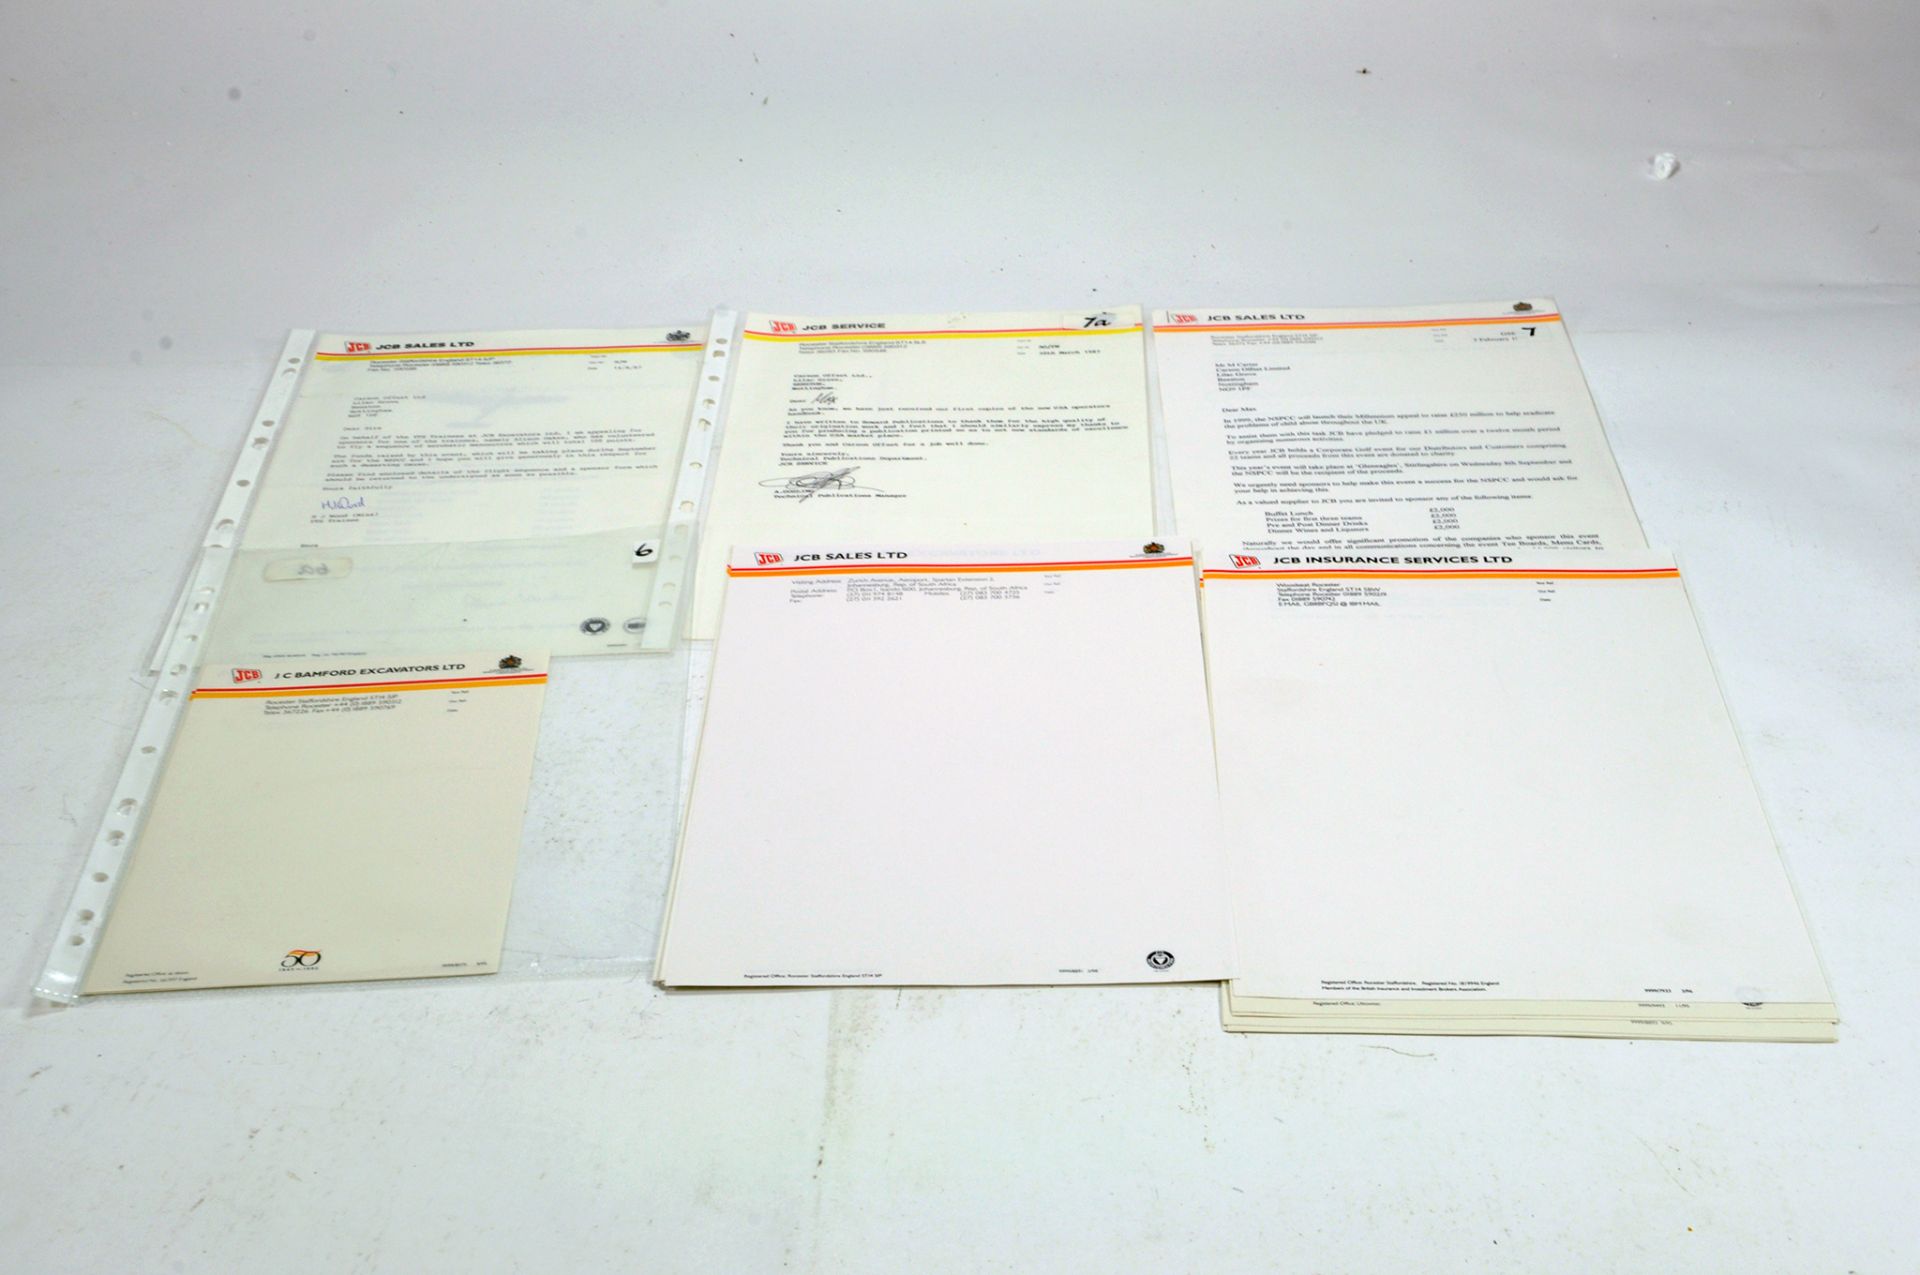 Interesting group of original JCB letters to the original producers of JCB literature and manuals,